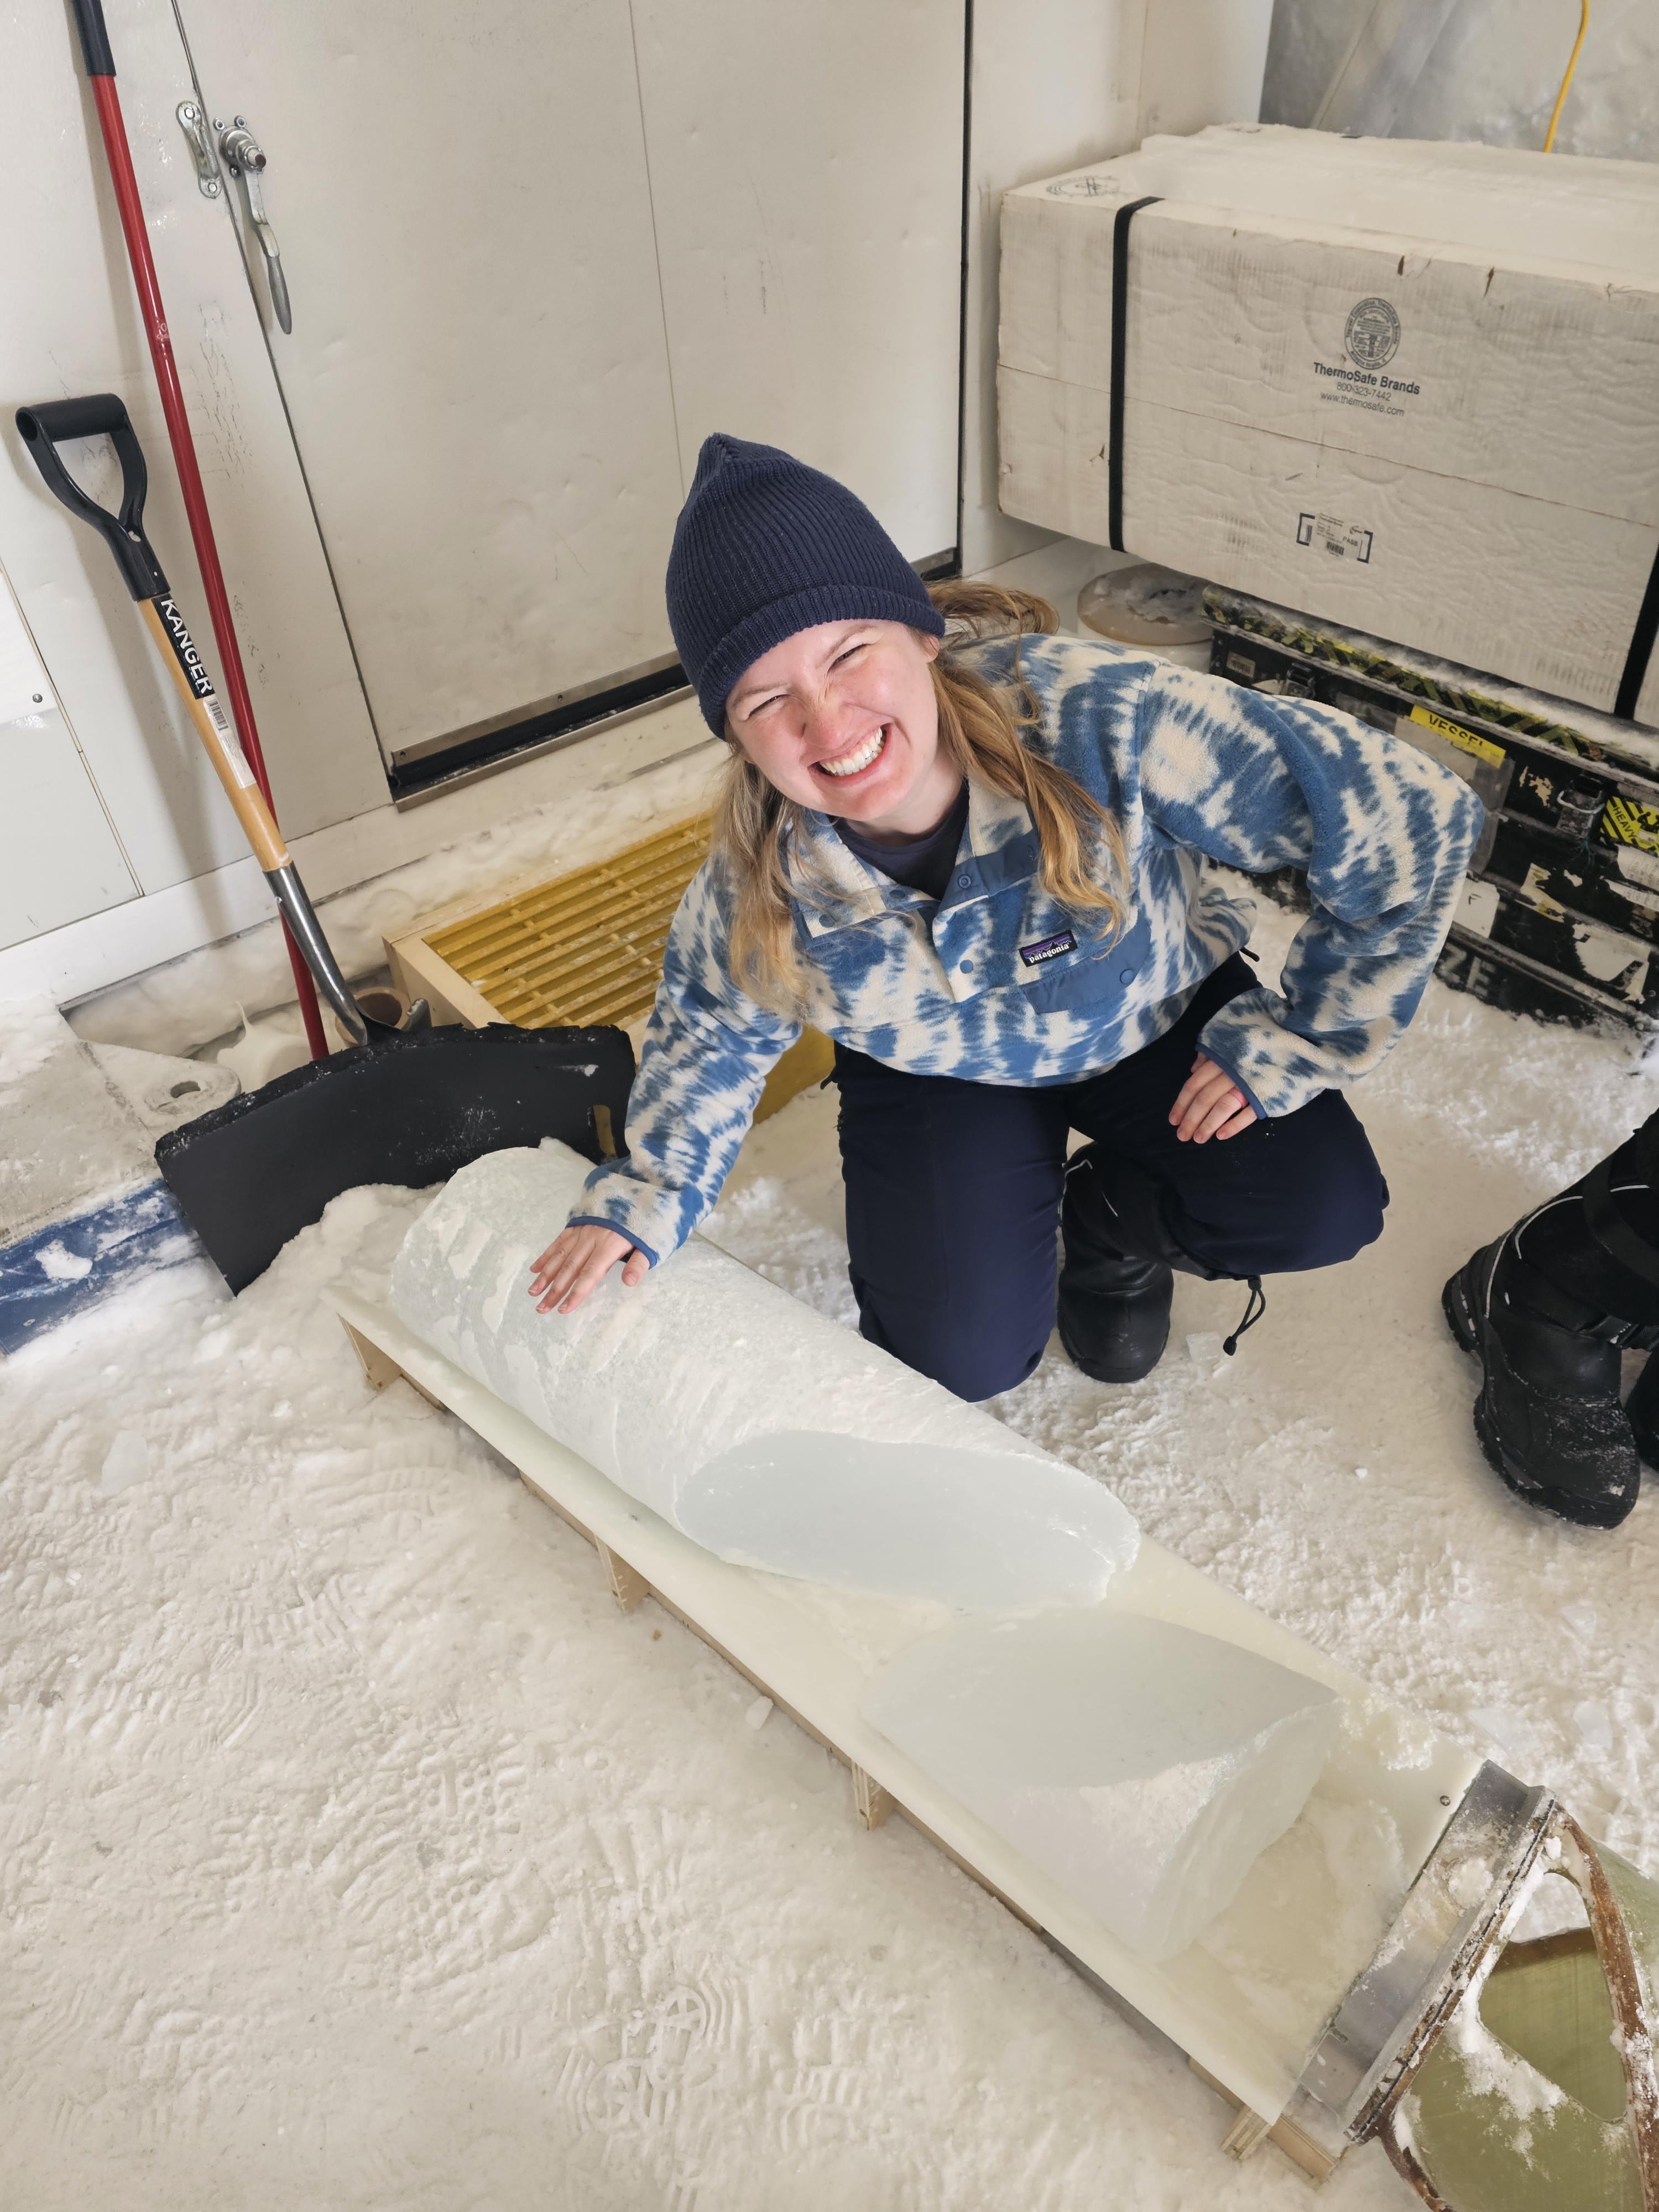 Moore pictured on her birthday, holding the final ice core.